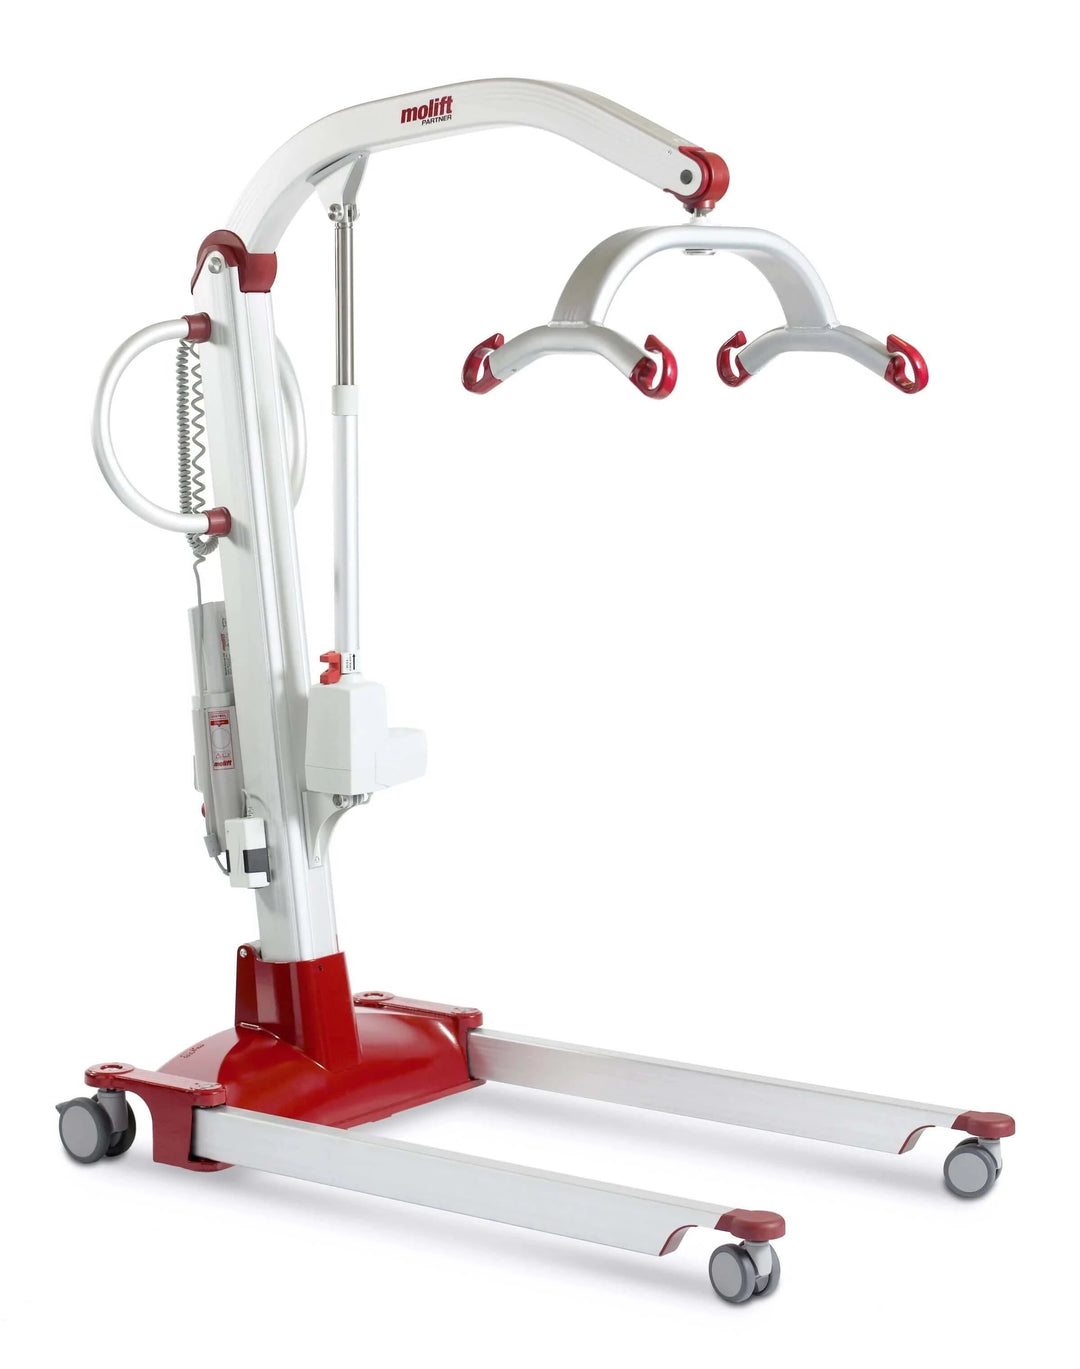 Molift - Mover 205 Mobile Patient Lift - with white background